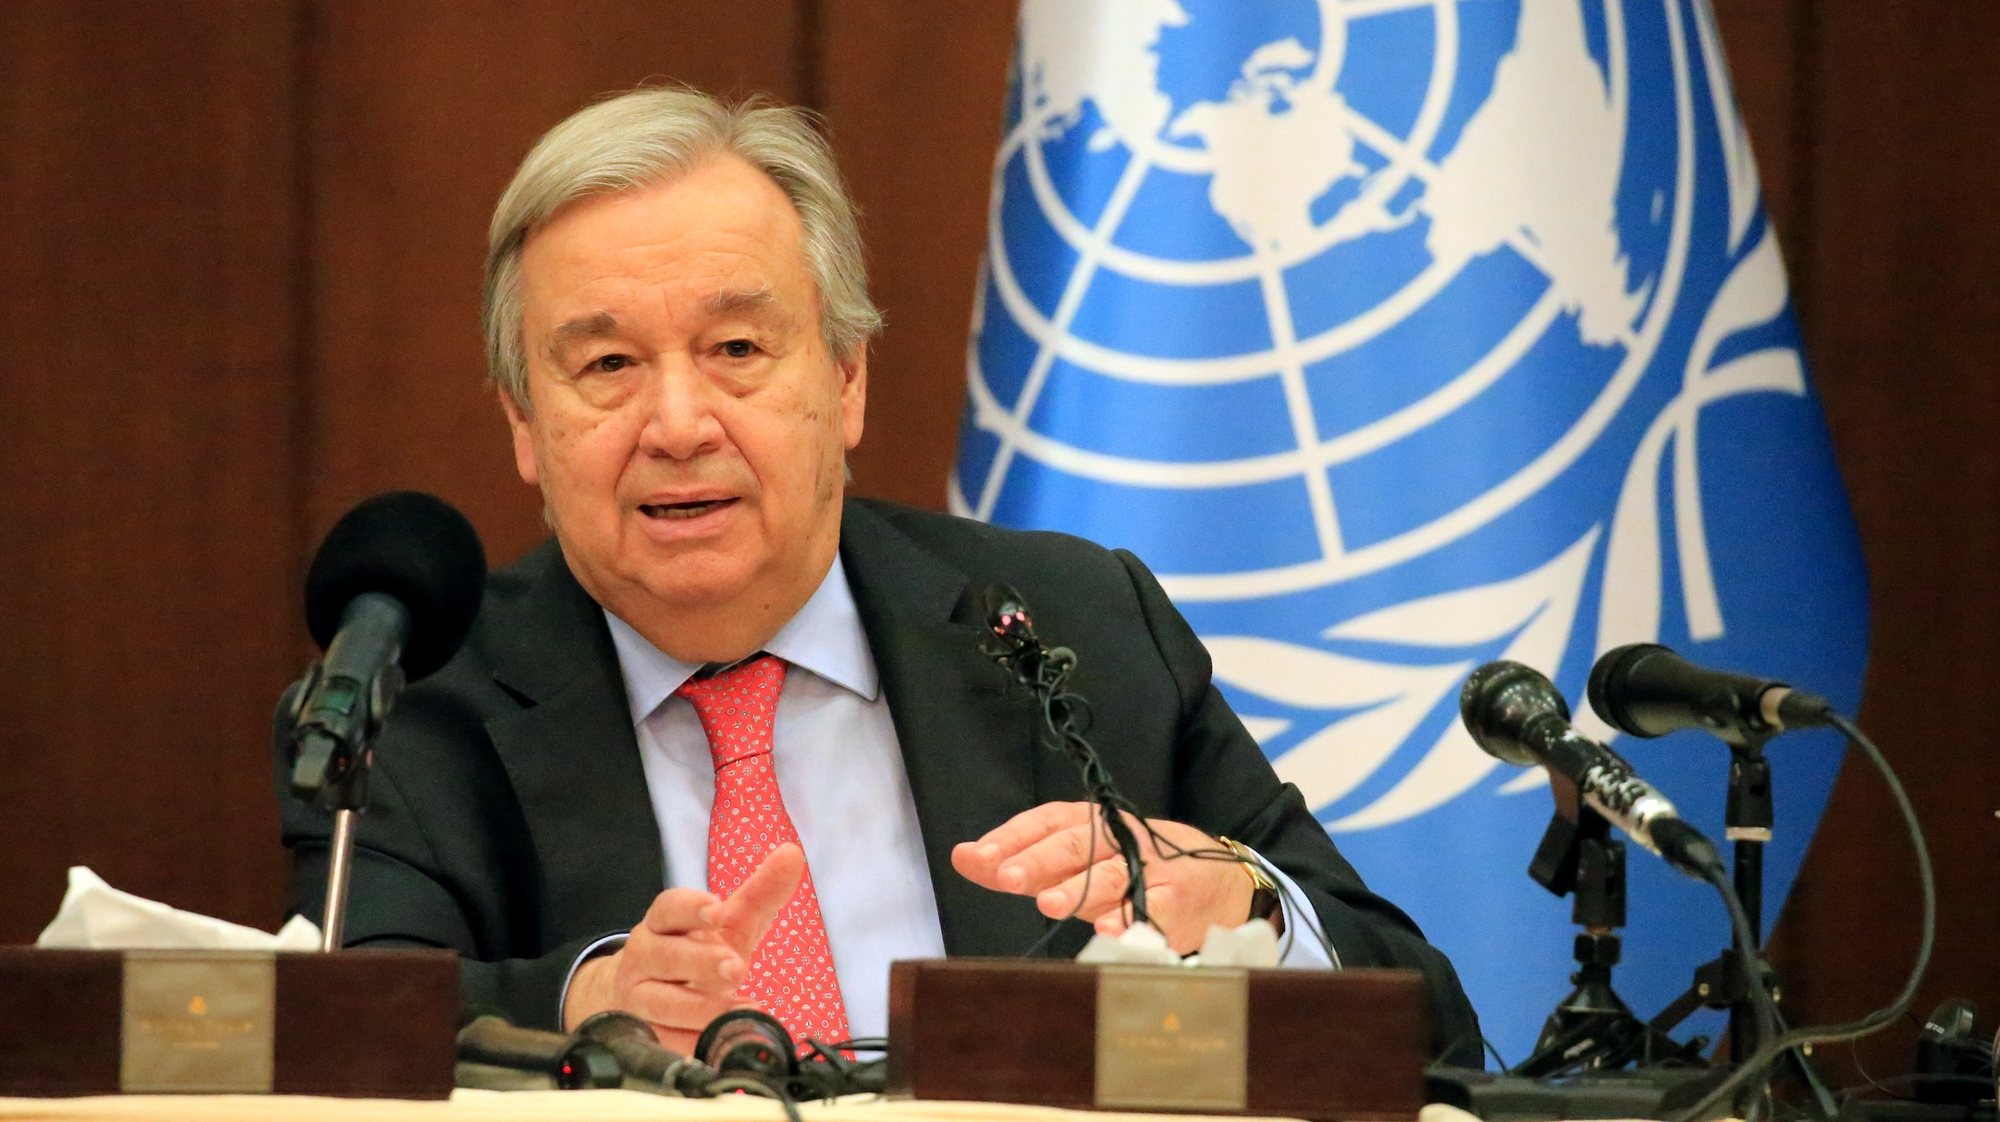 epa10497271 The Secretary-General of the United Nations, Antonio Guterres speaks during a press conference at the al-Rasheed hotel in Baghdad, Iraq, 01 March 2023. Antonio Guterres announced that his visit is to show solidarity and promote hope for a better future for Iraq.  EPA/AHMED JALIL